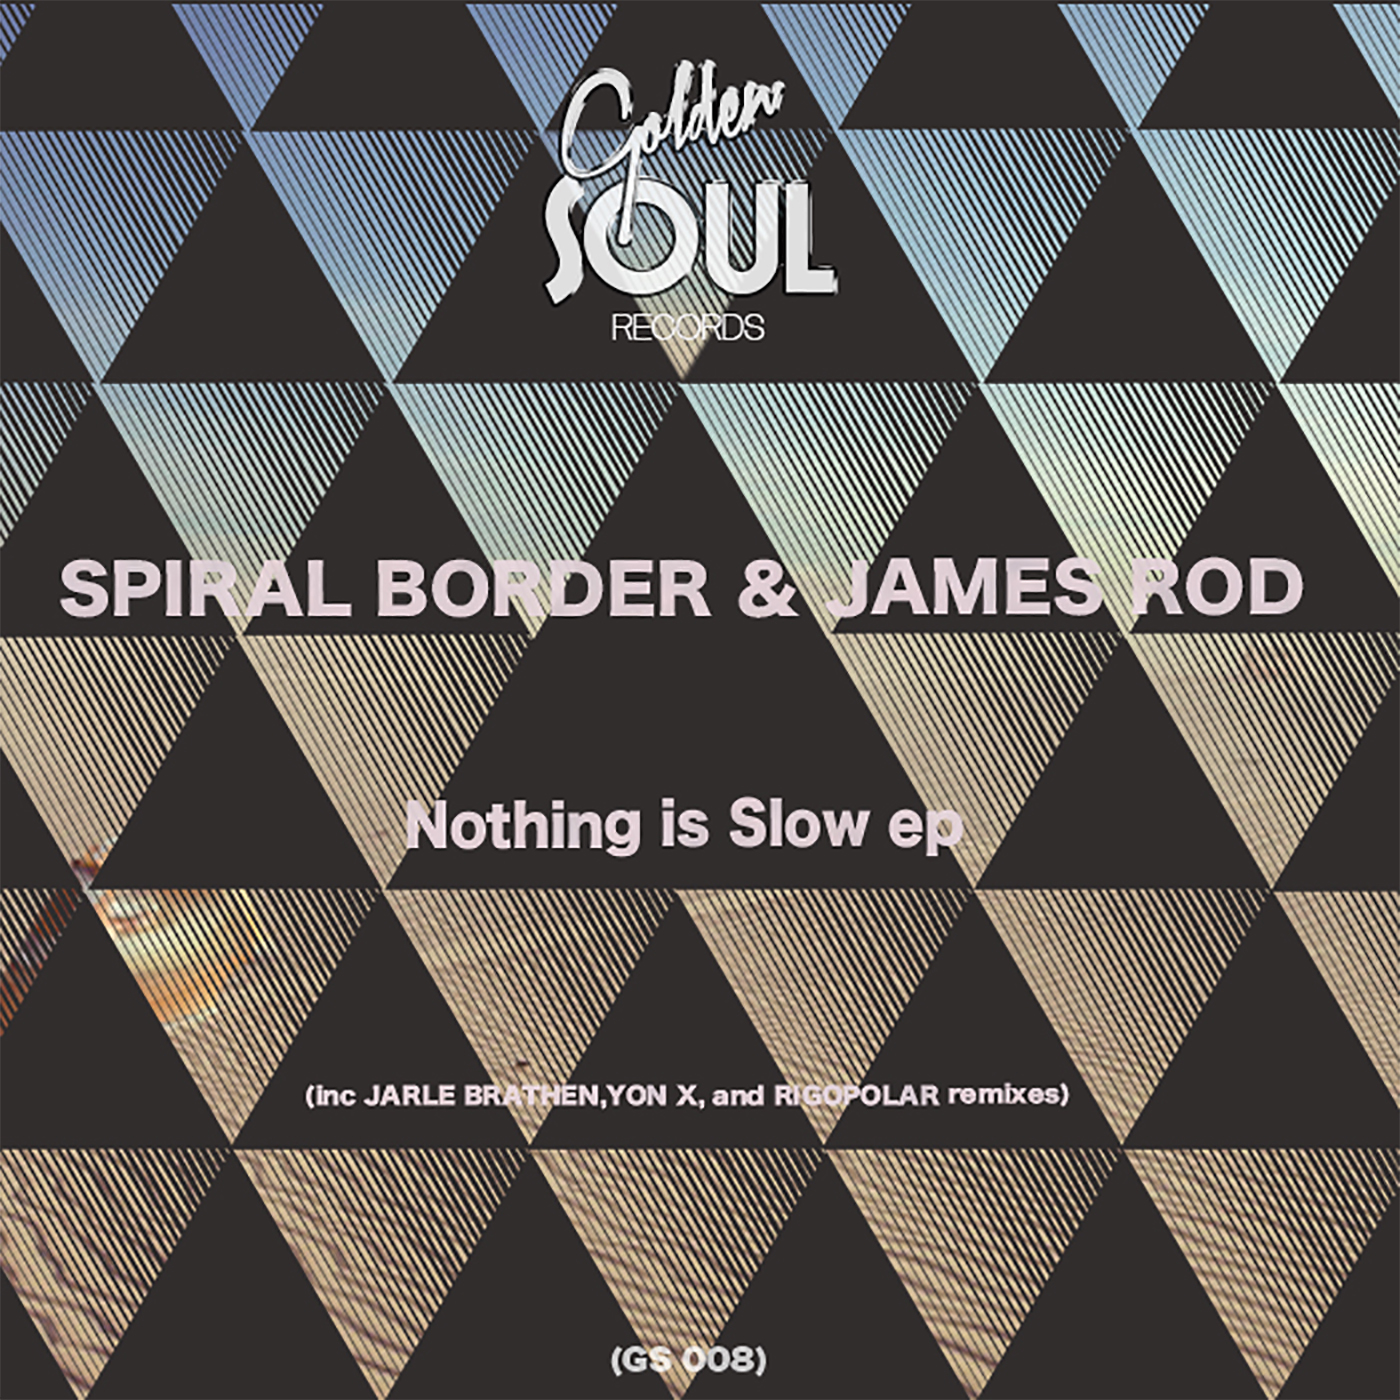 SPIRAL BORDER & JAMES ROD - Nothing is Slow ep